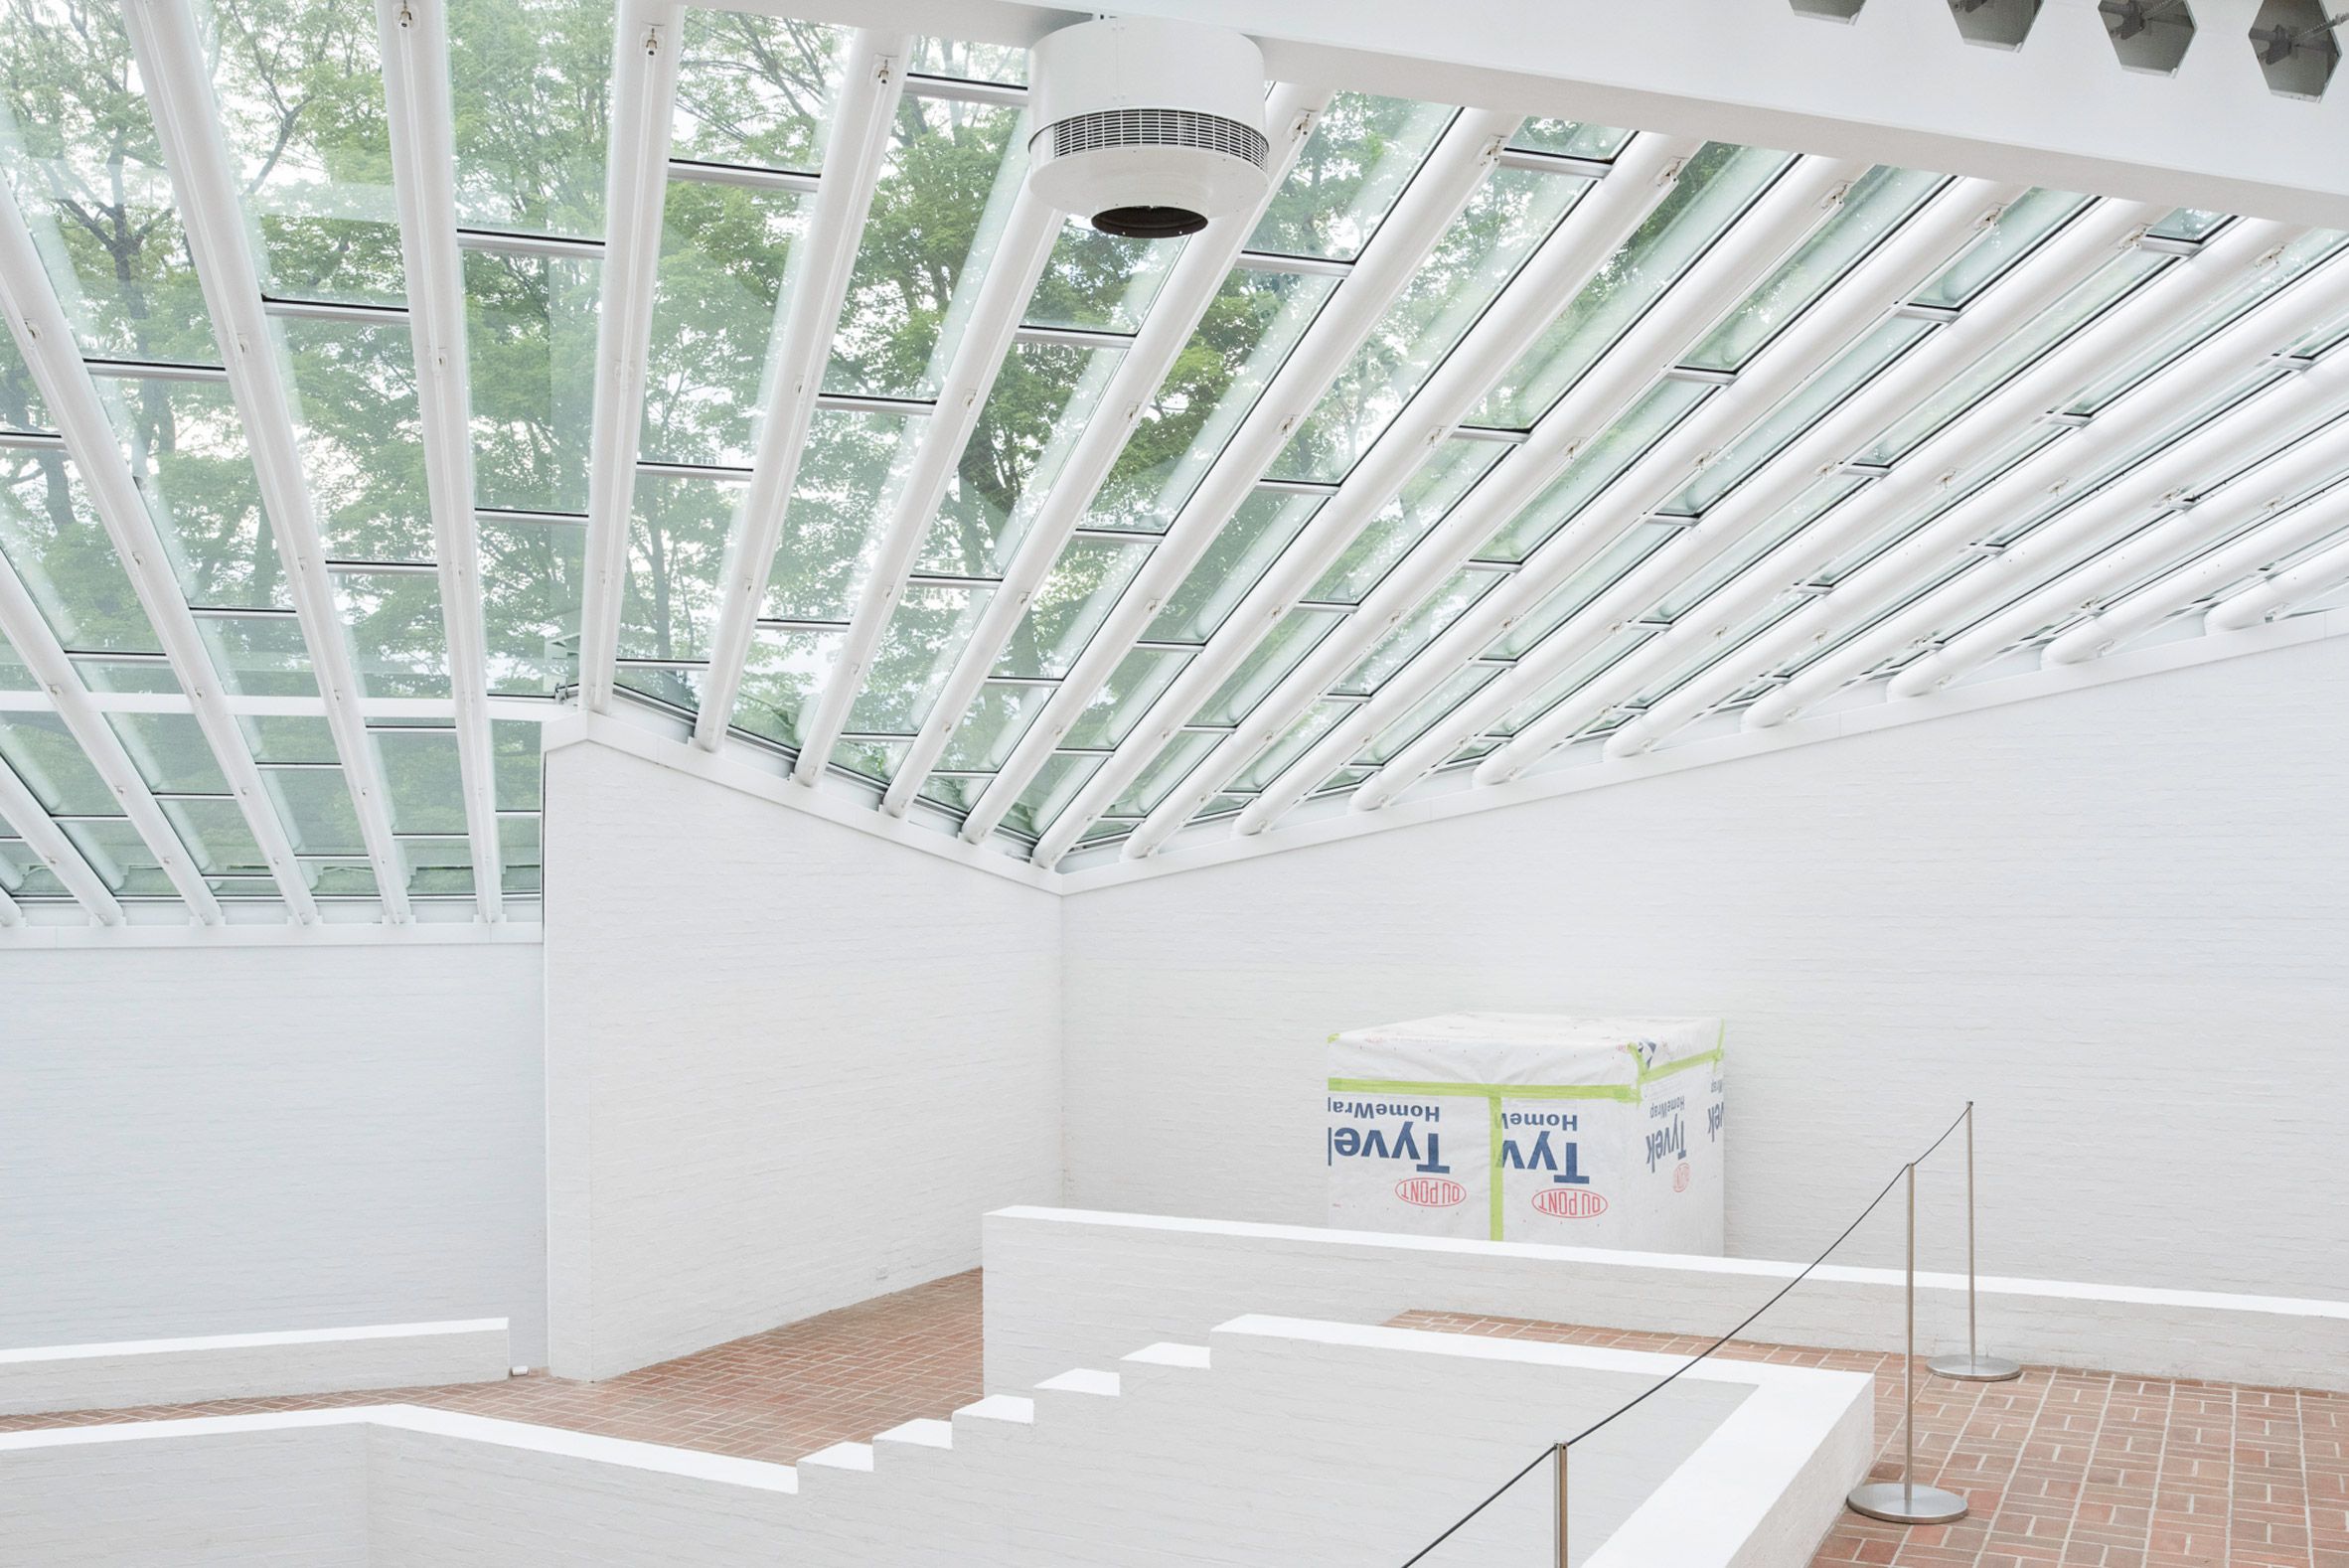 Restoration of the sculpture gallery at Philip Johnson's Glass House